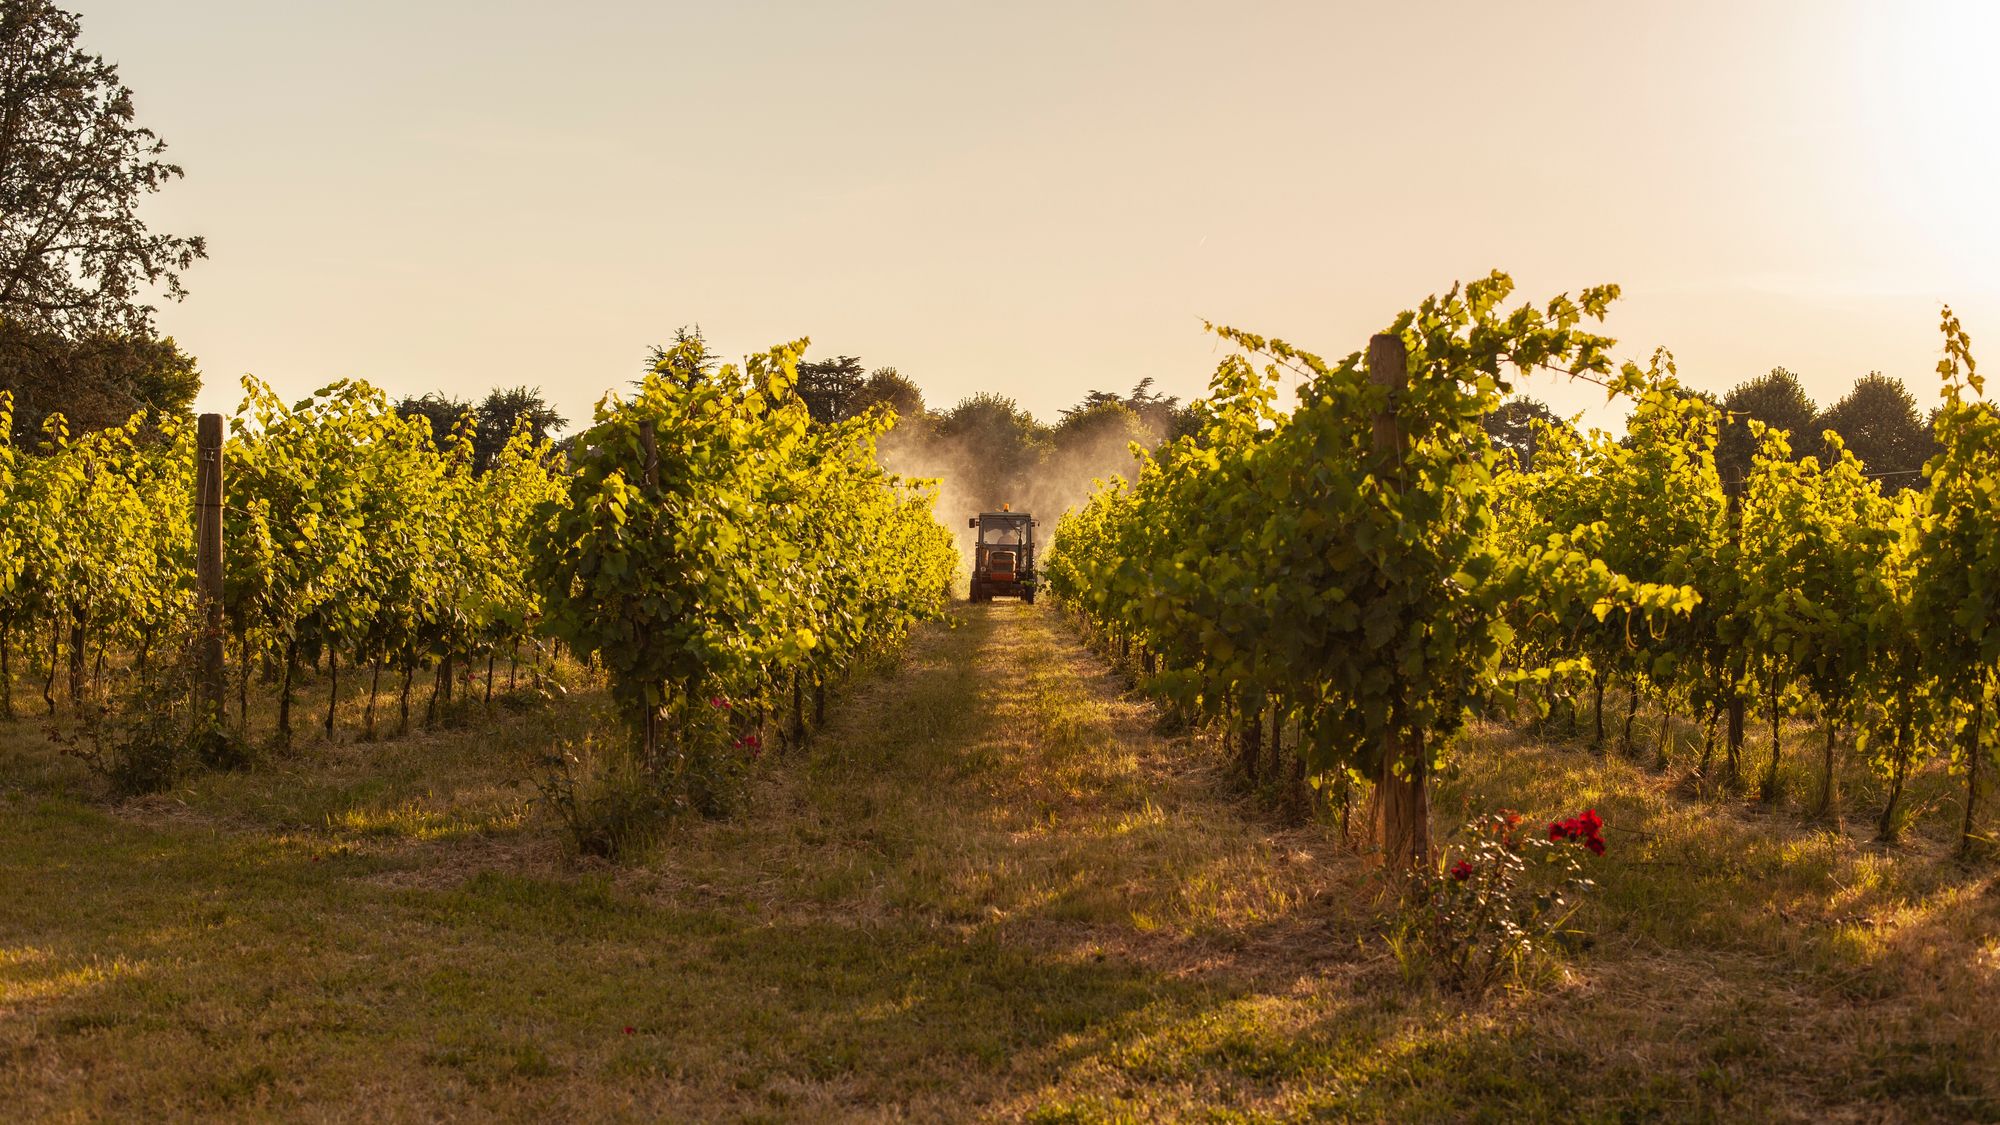 Tractor sprays insecticide in vineyard